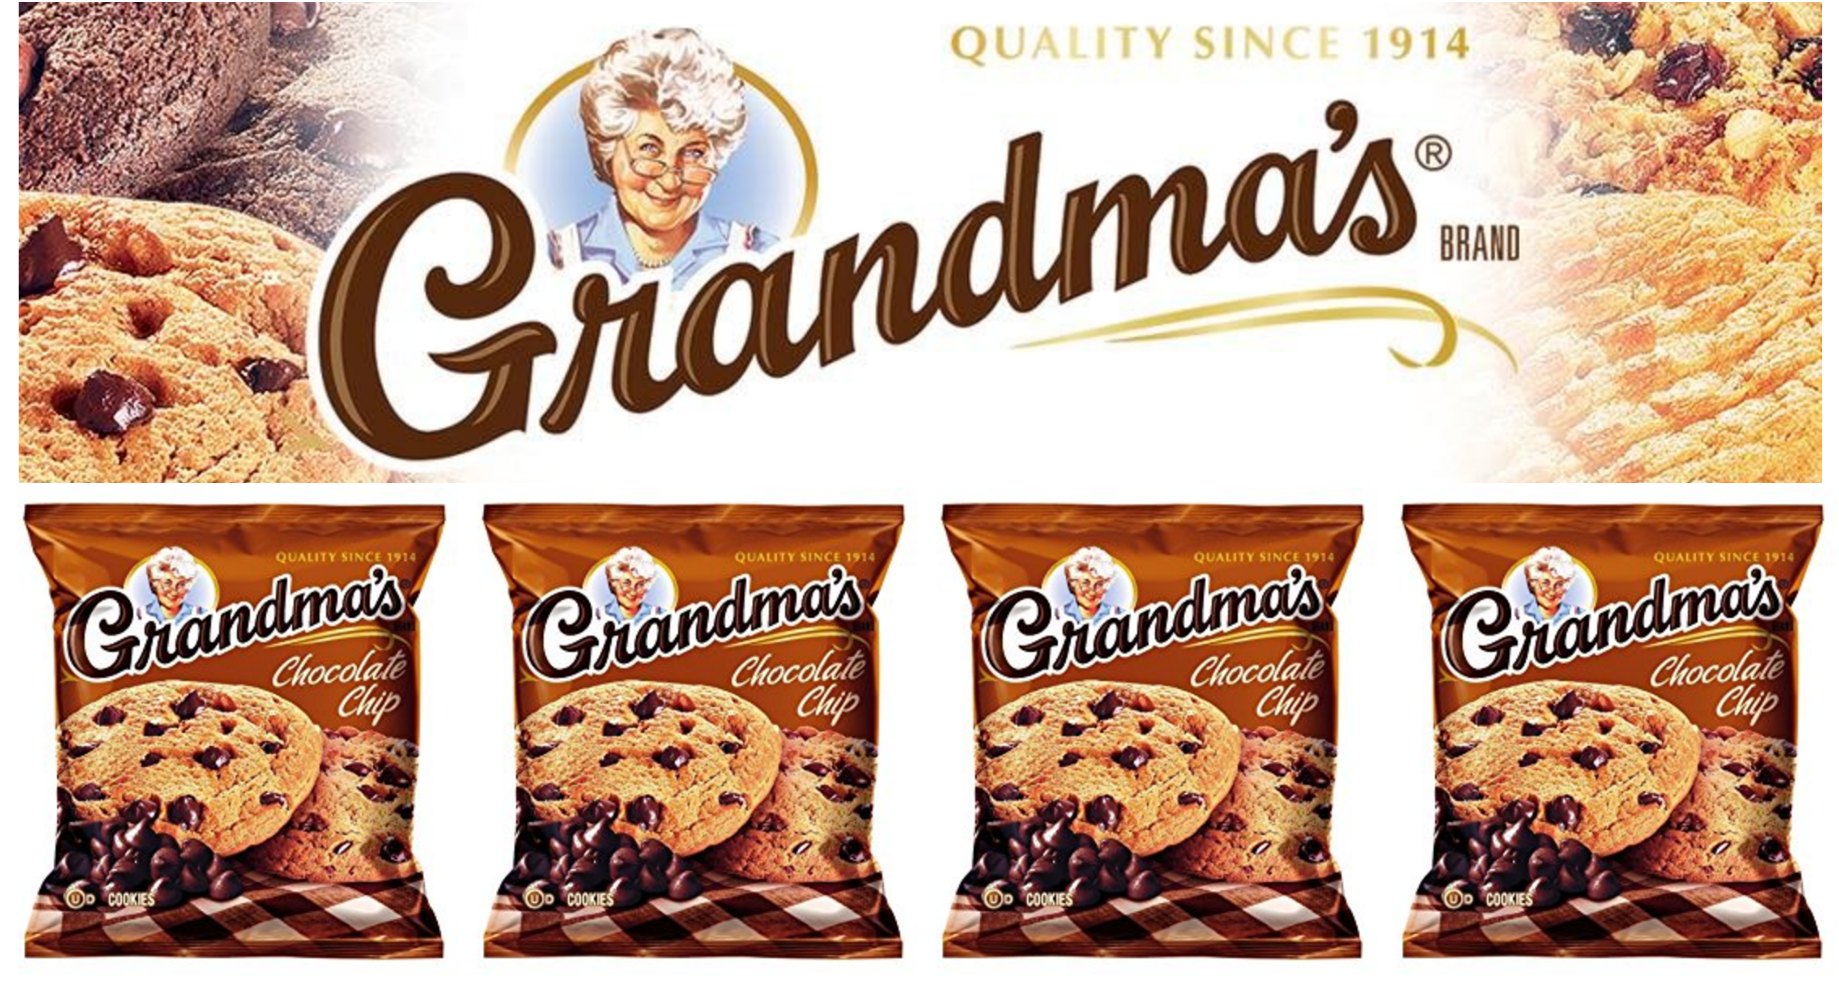 Grandma's Chocolate Chip Cookies, 2.5 Ounce (Pack of 60) as low as $17.30 or 29¢/Pack shipped!